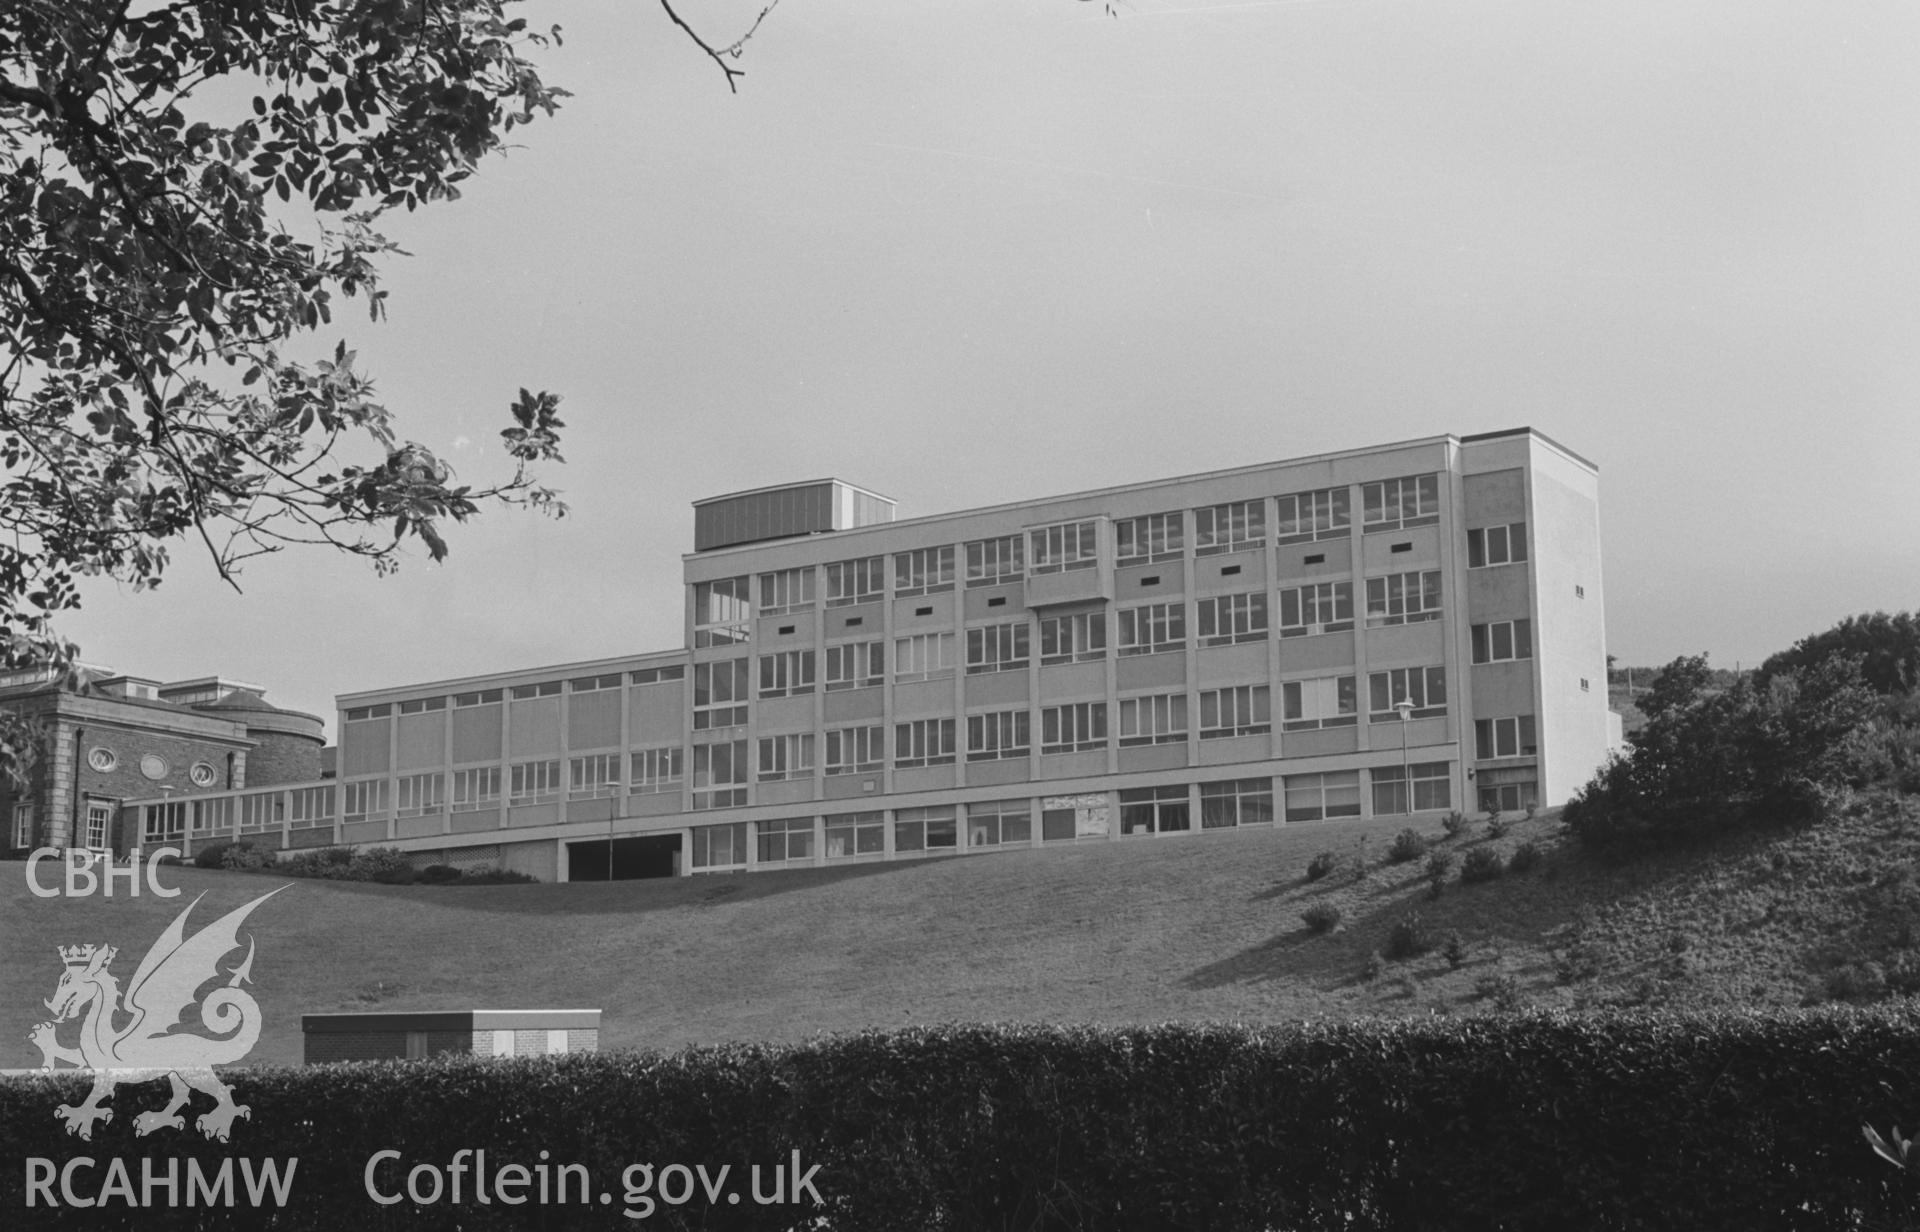 Digital copy of a black and white negative showing new chemistry department buildings, Plascrug, University College Wales Aberystwyth. Photographed by Arthur O. Chater in August 1967.
[Looking north from Plas Crug, SN 558 815]